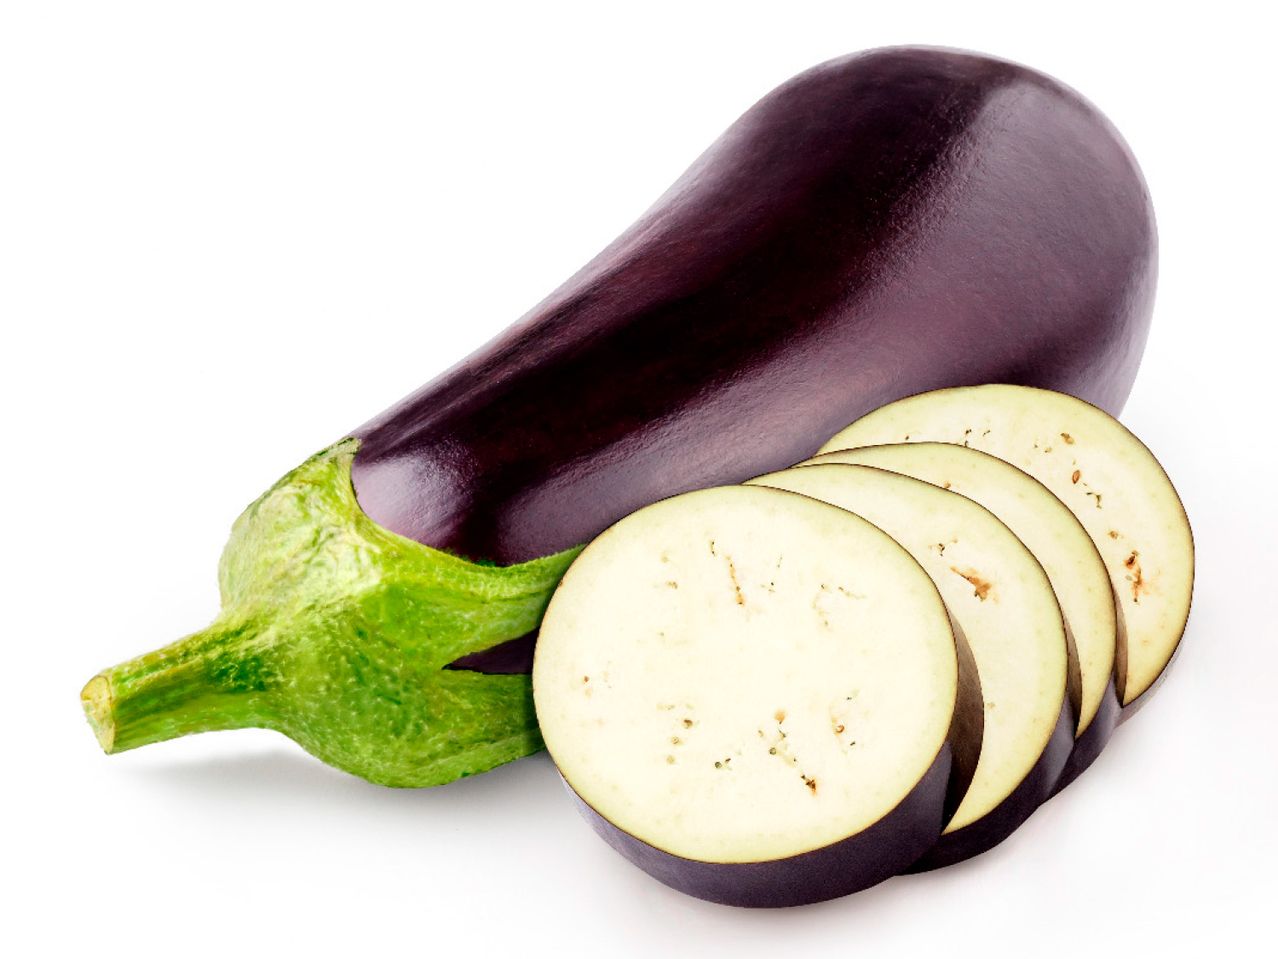 Go to full screen view: Aubergine - Image 1